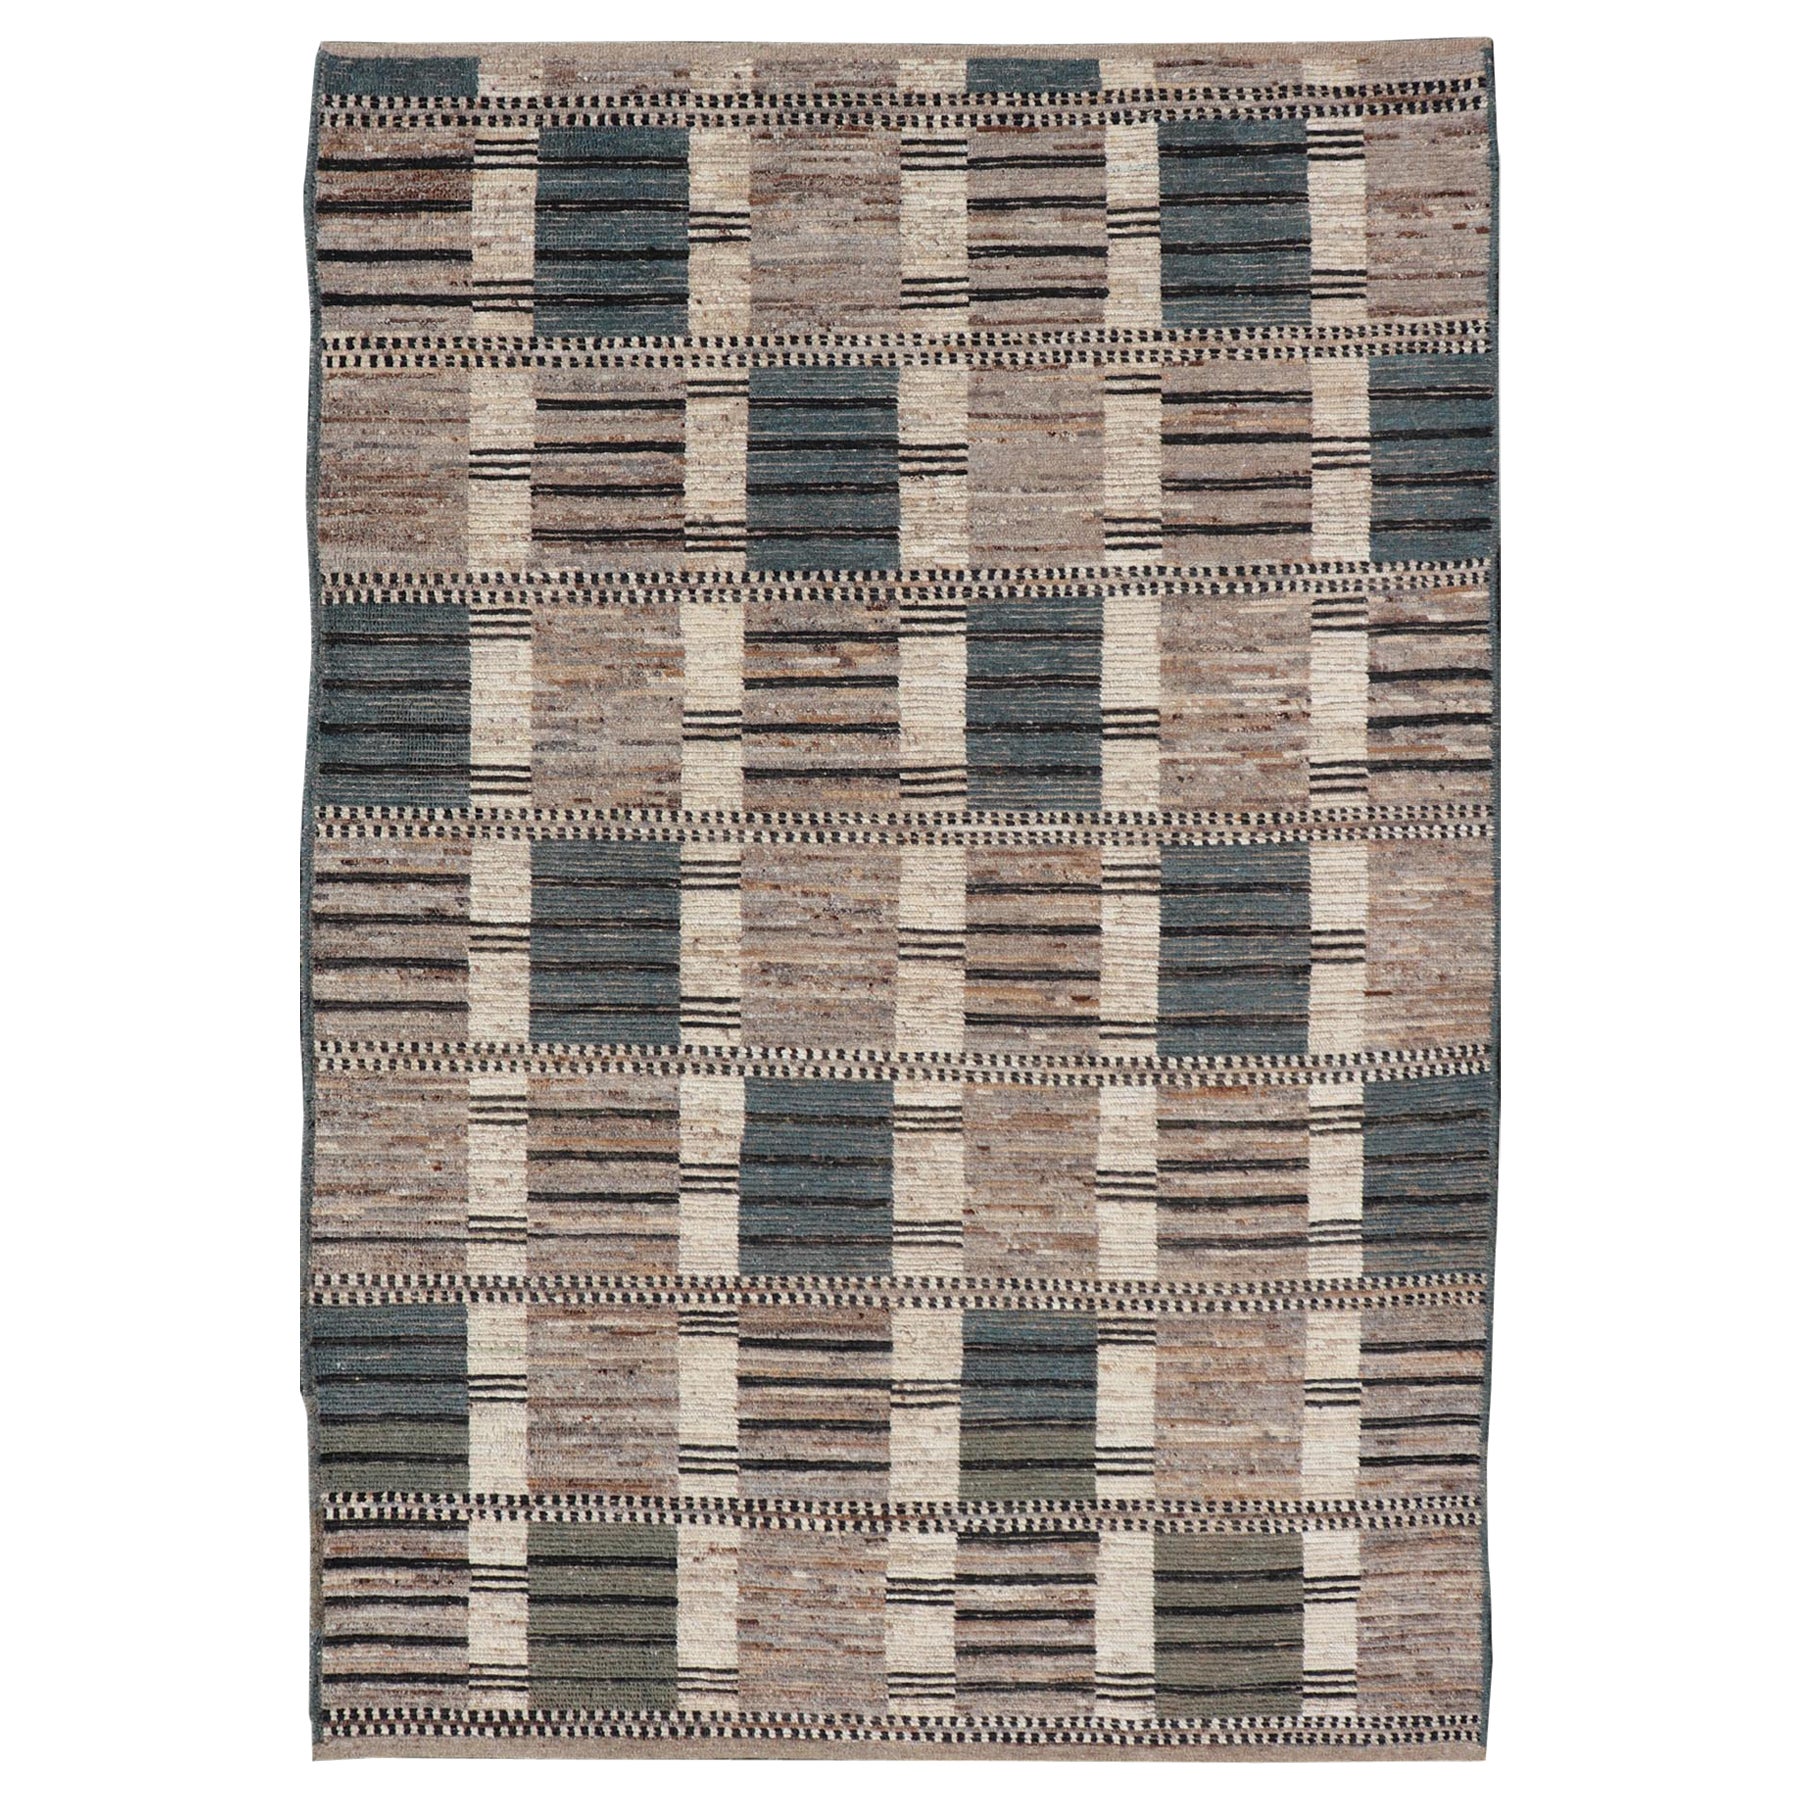 Modern Casual Design Tribal Rug with Checkered Pattern in Teal, Cream, and Brown